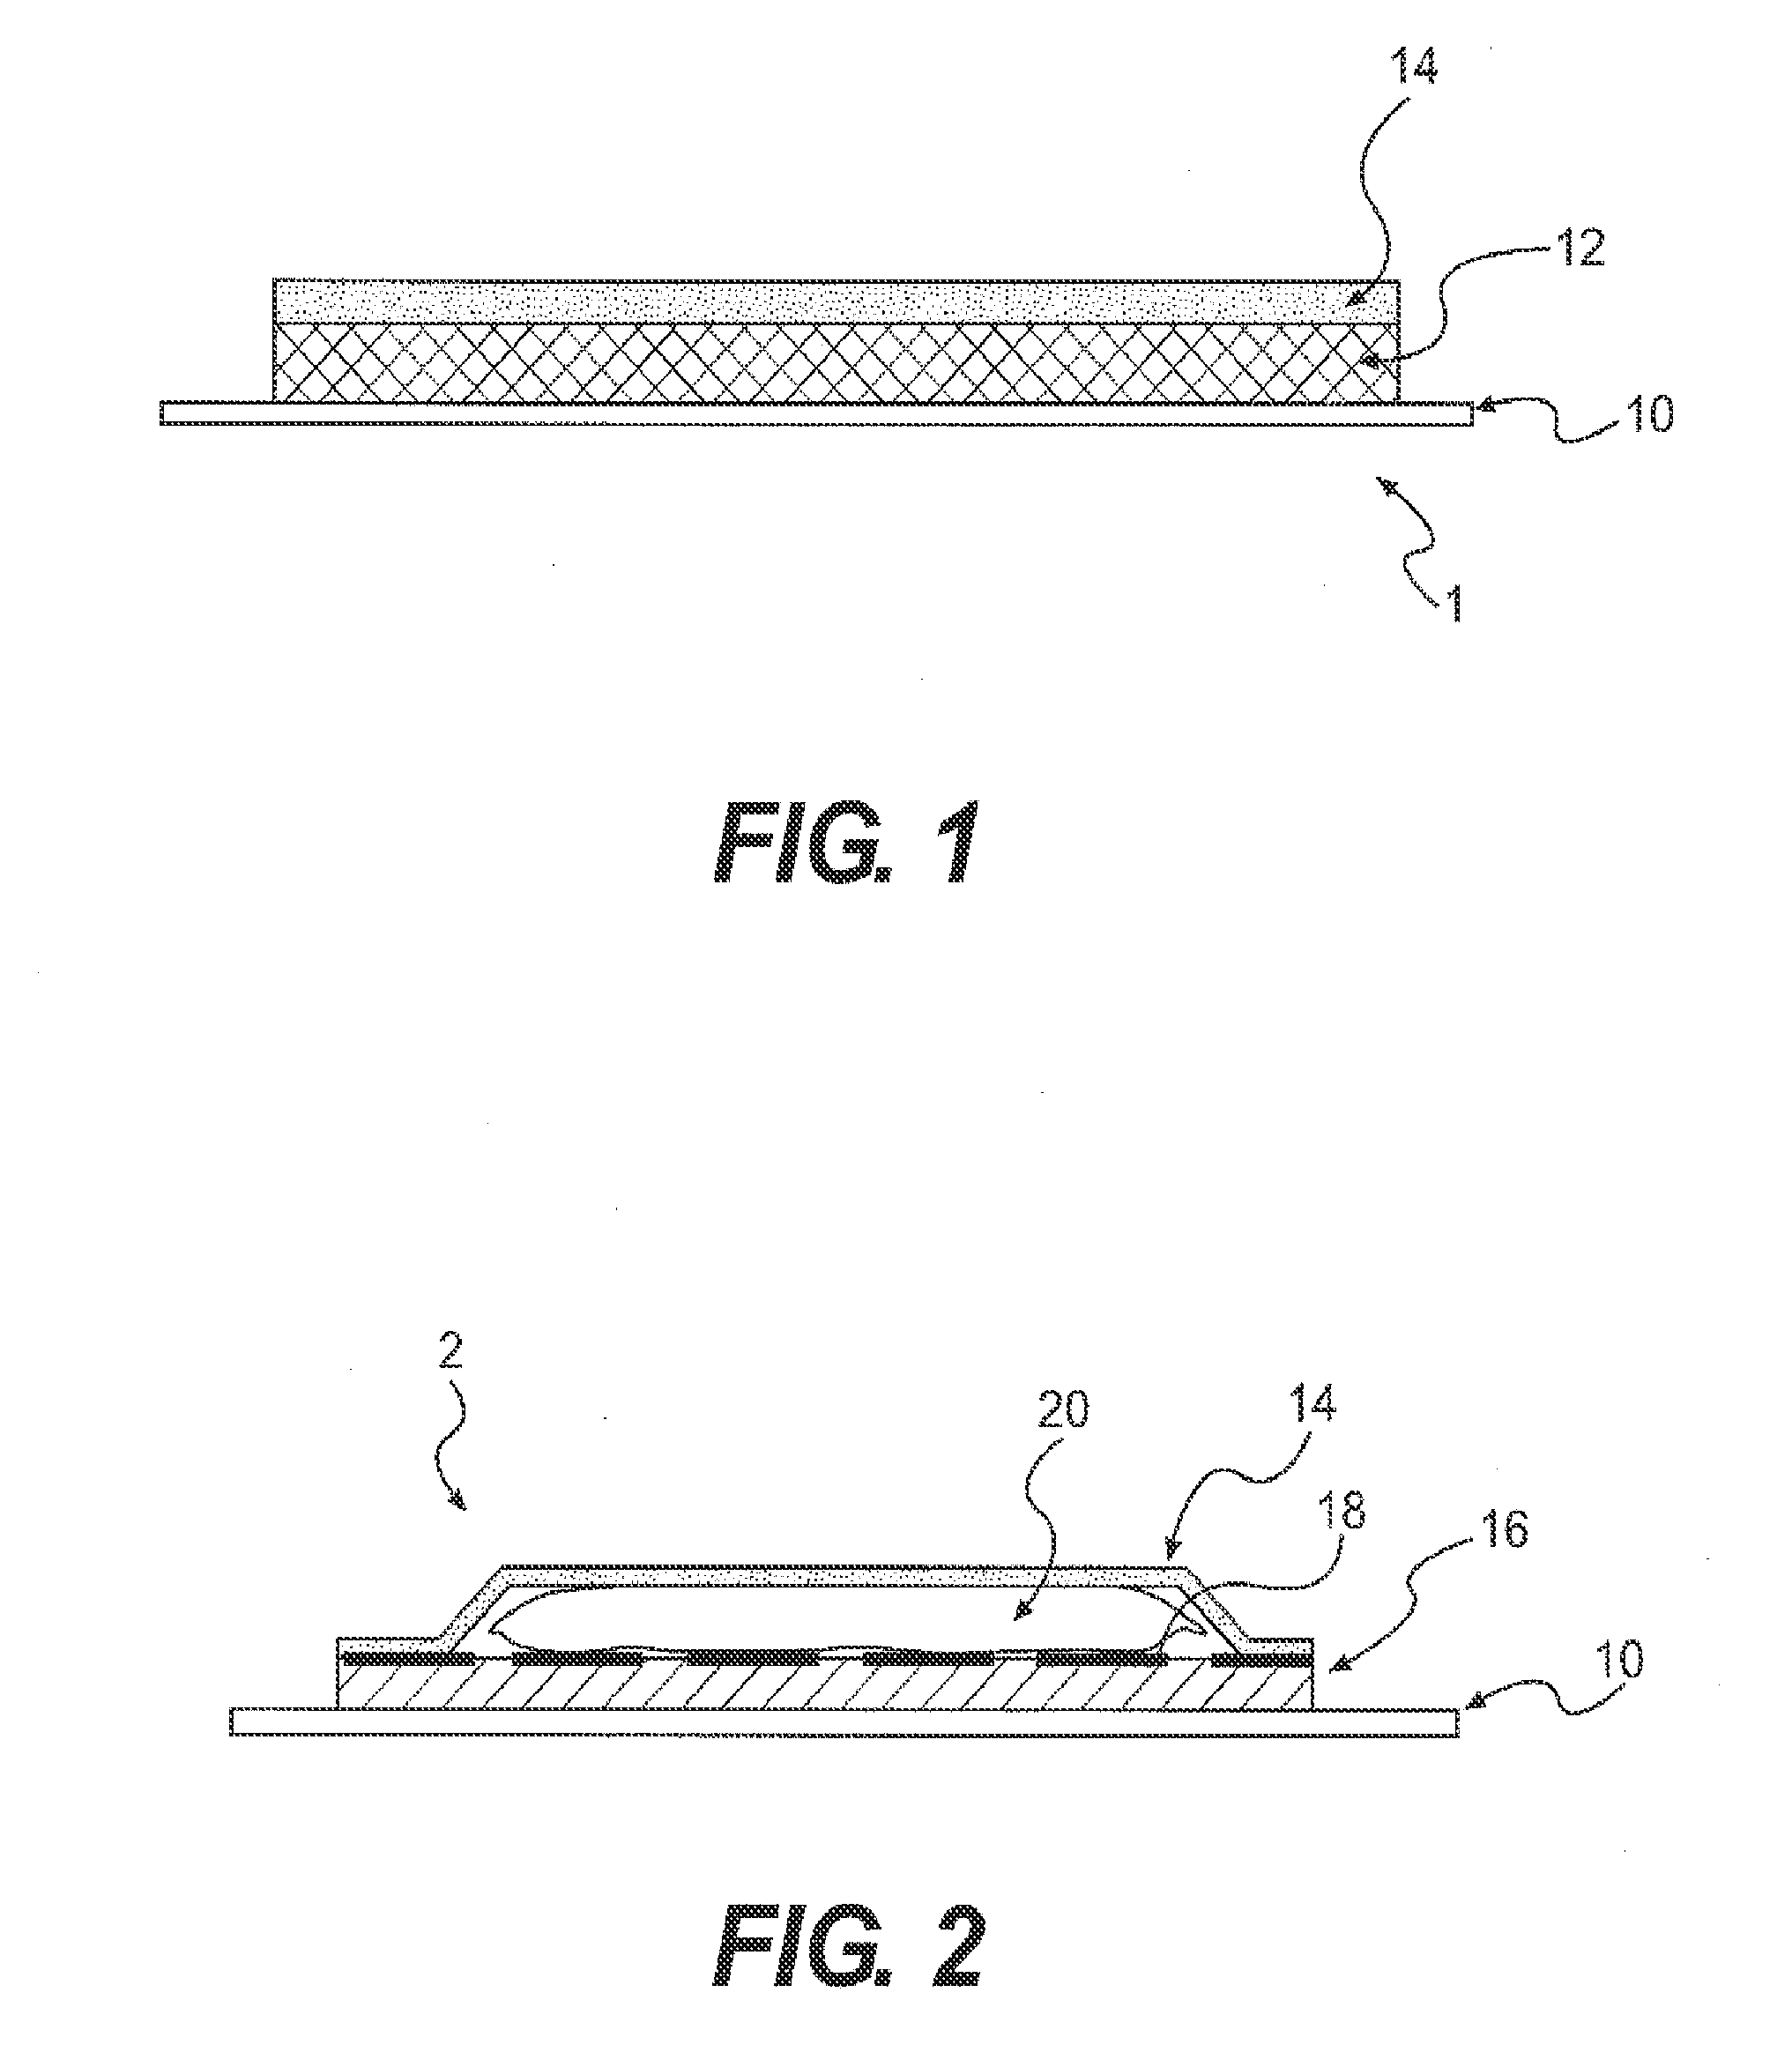 Pharmaceutical composition containing a hypomethylating agent and a histone deacetylase inhibitor